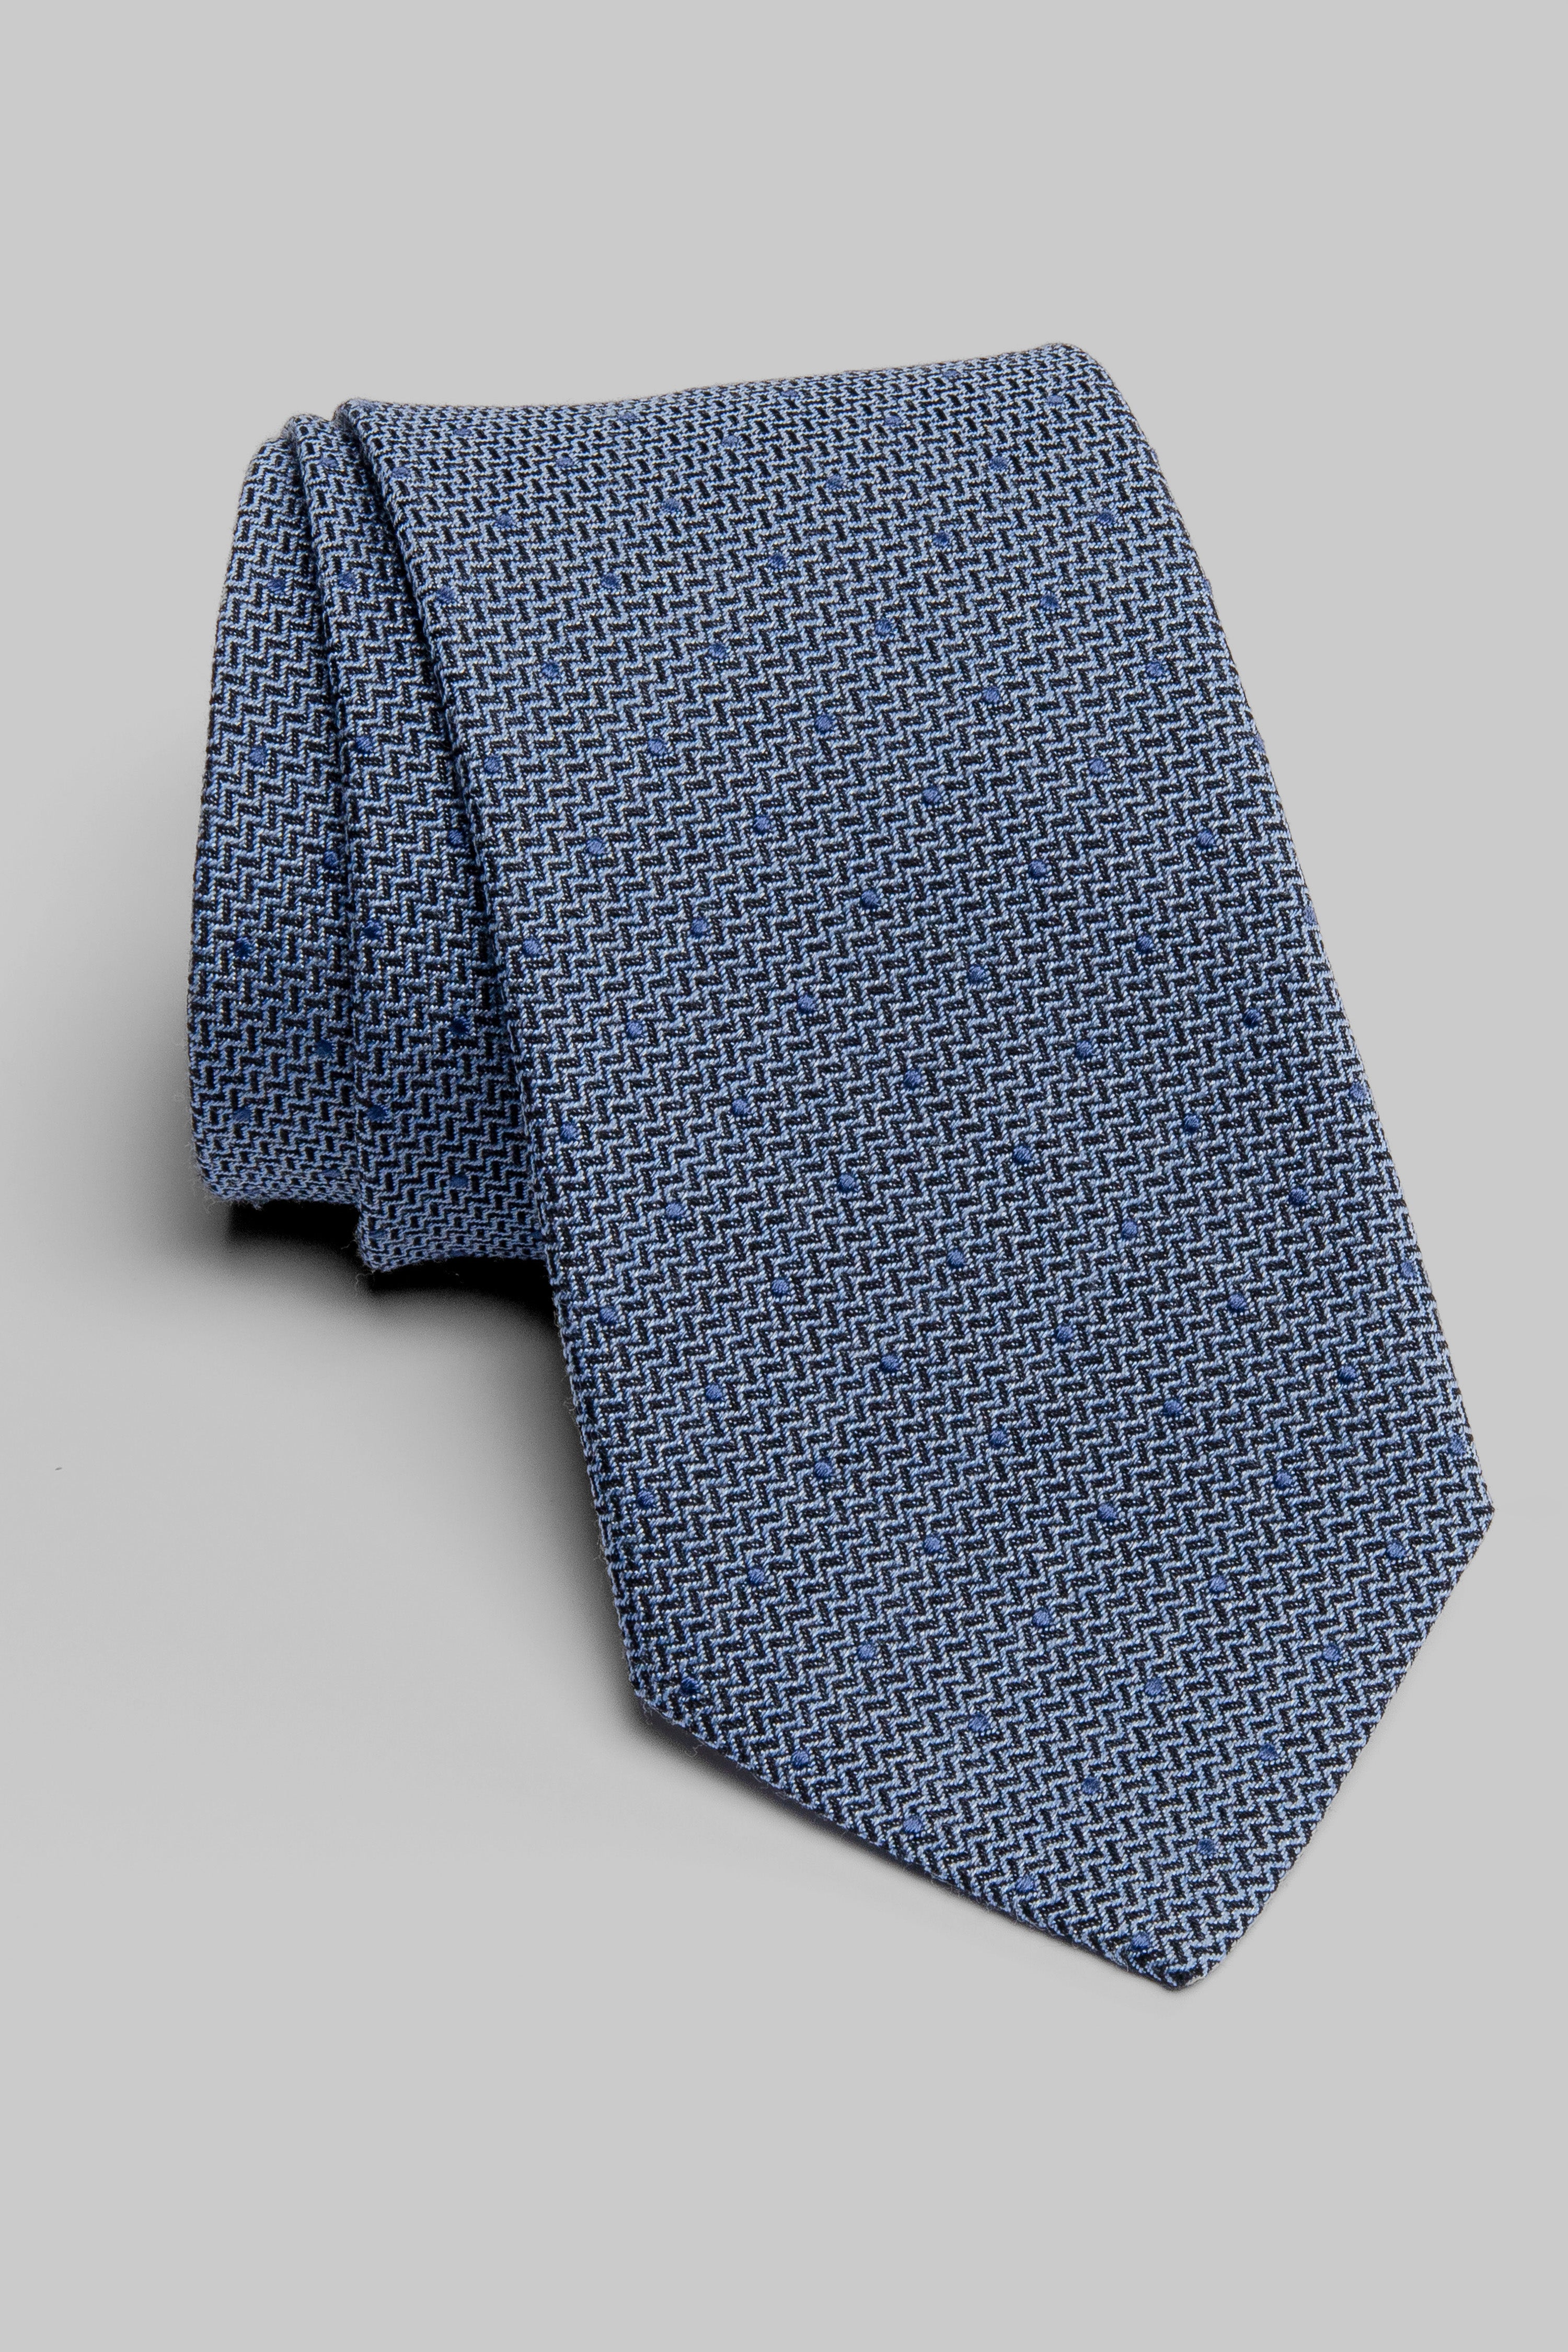 Alt view 1 Pindot Woven Tie in Blue